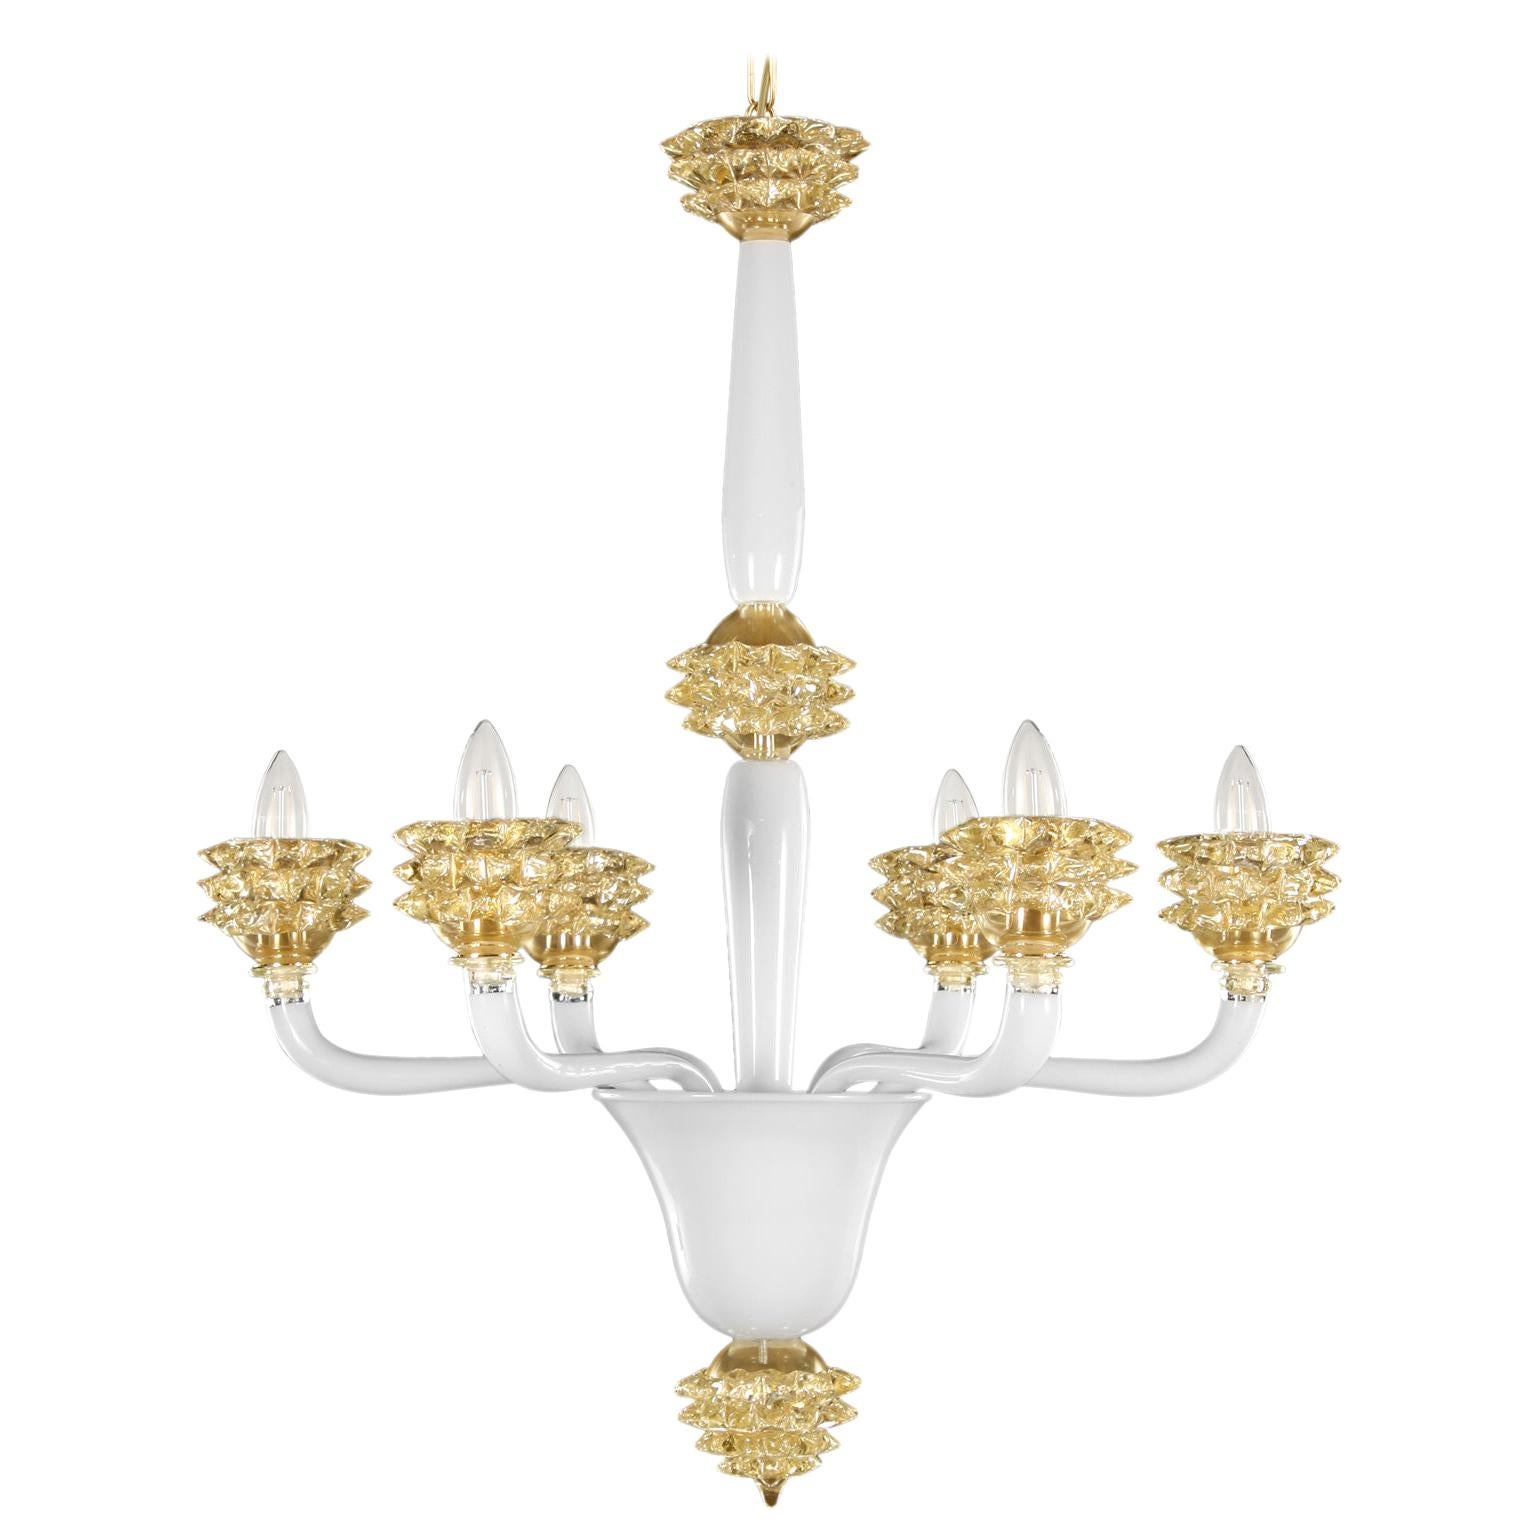 Chandelier 6 arms White Encased Murano Glass Gold Rostri details by Multiforme For Sale